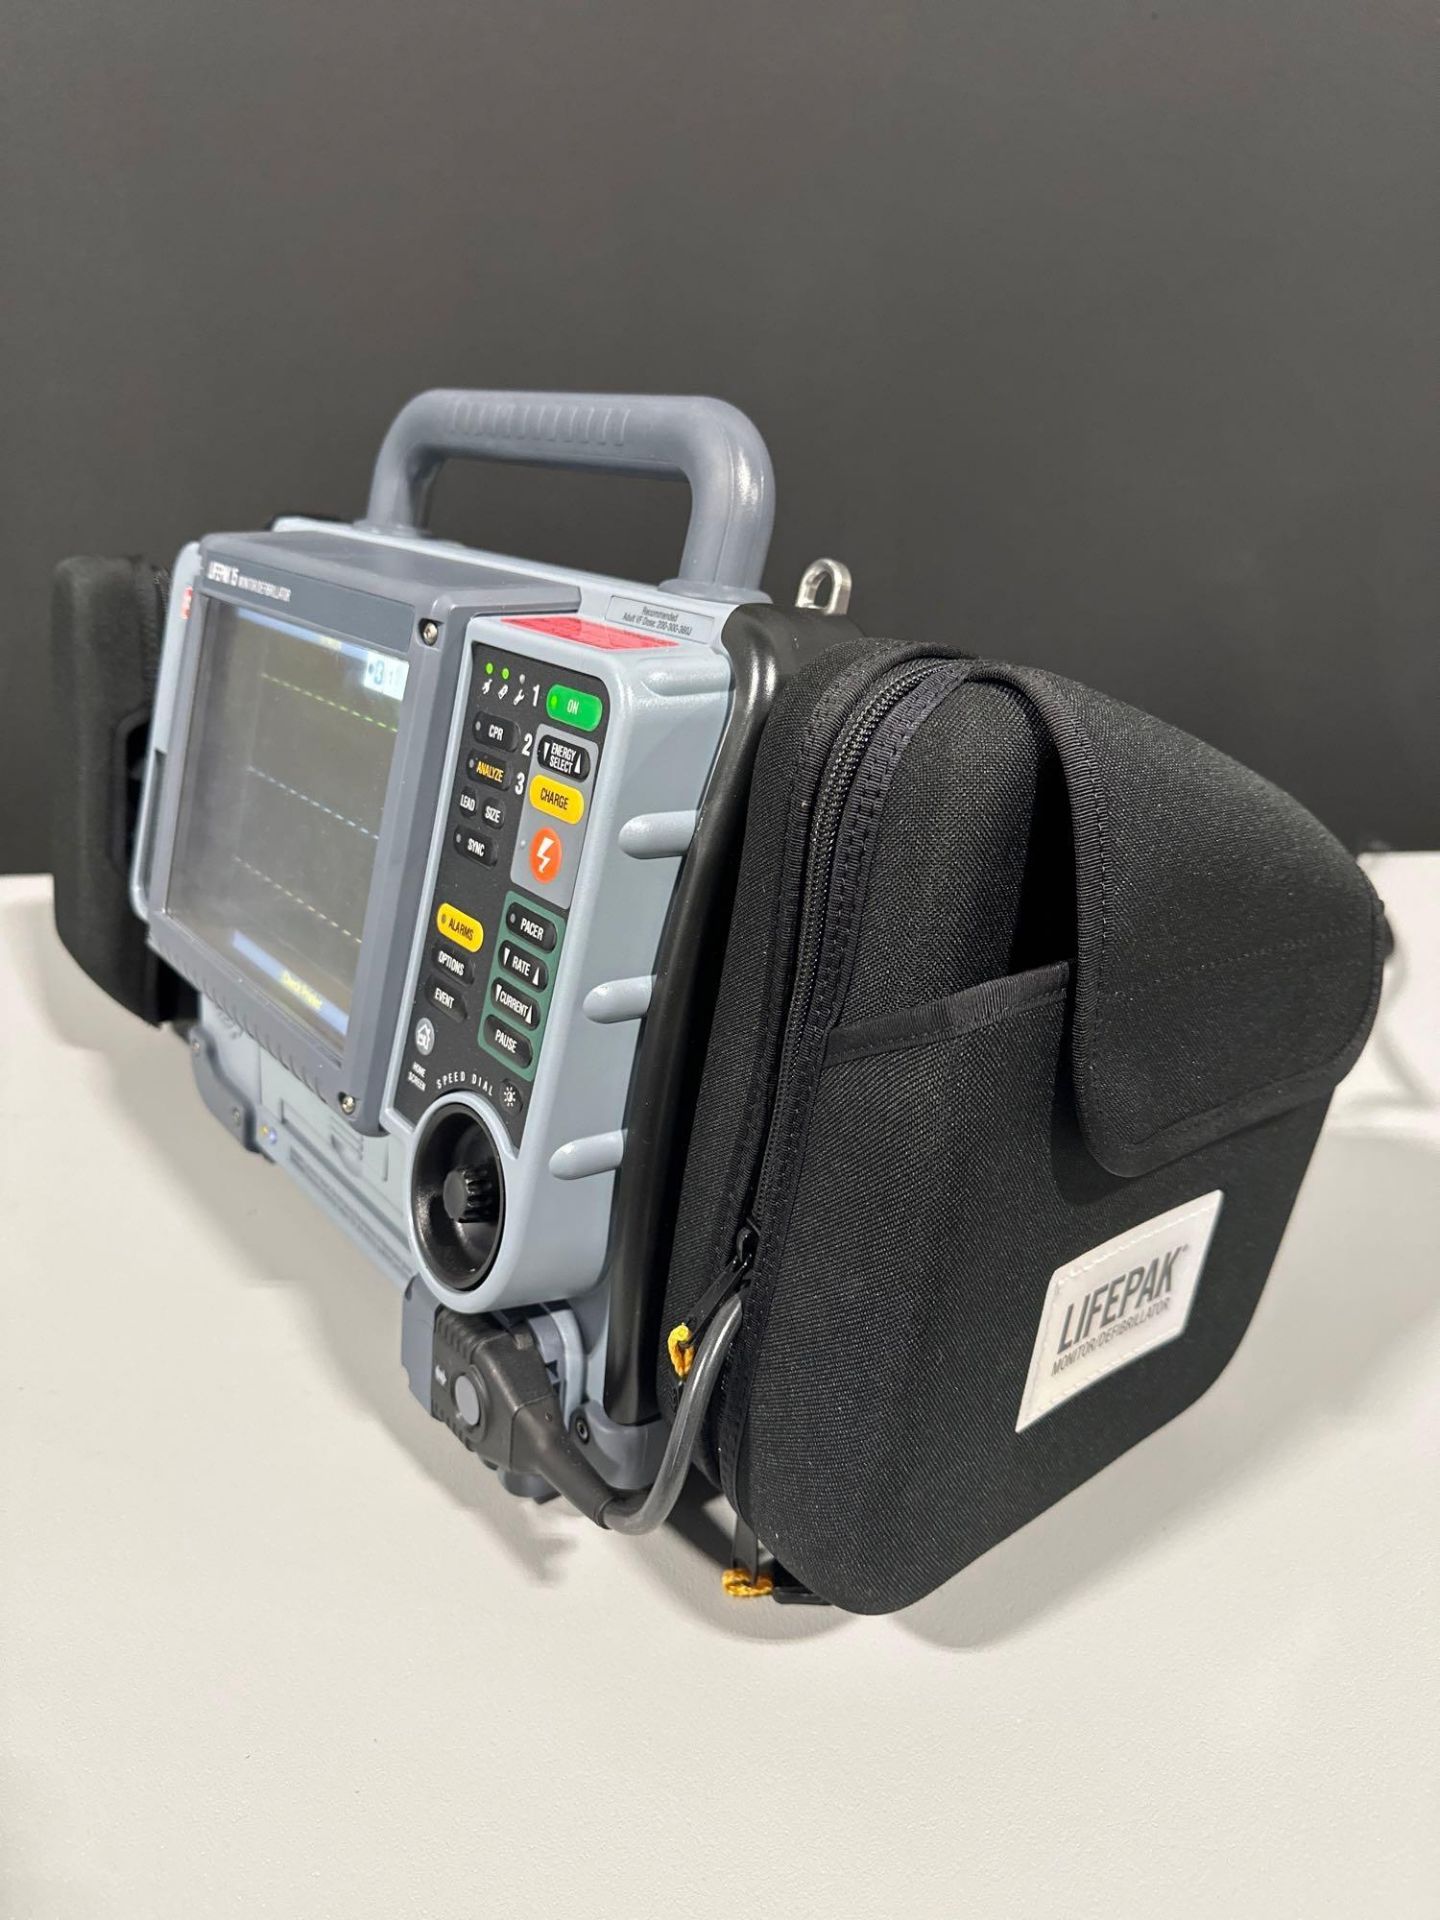 PHYSIO CONTROL LIFEPAK 15 DEFIB WITH PACING, 3 LEAD ECG, CO2, SPO2, CPR, ANALYZE, AC POWER ADAPTER, - Image 3 of 8